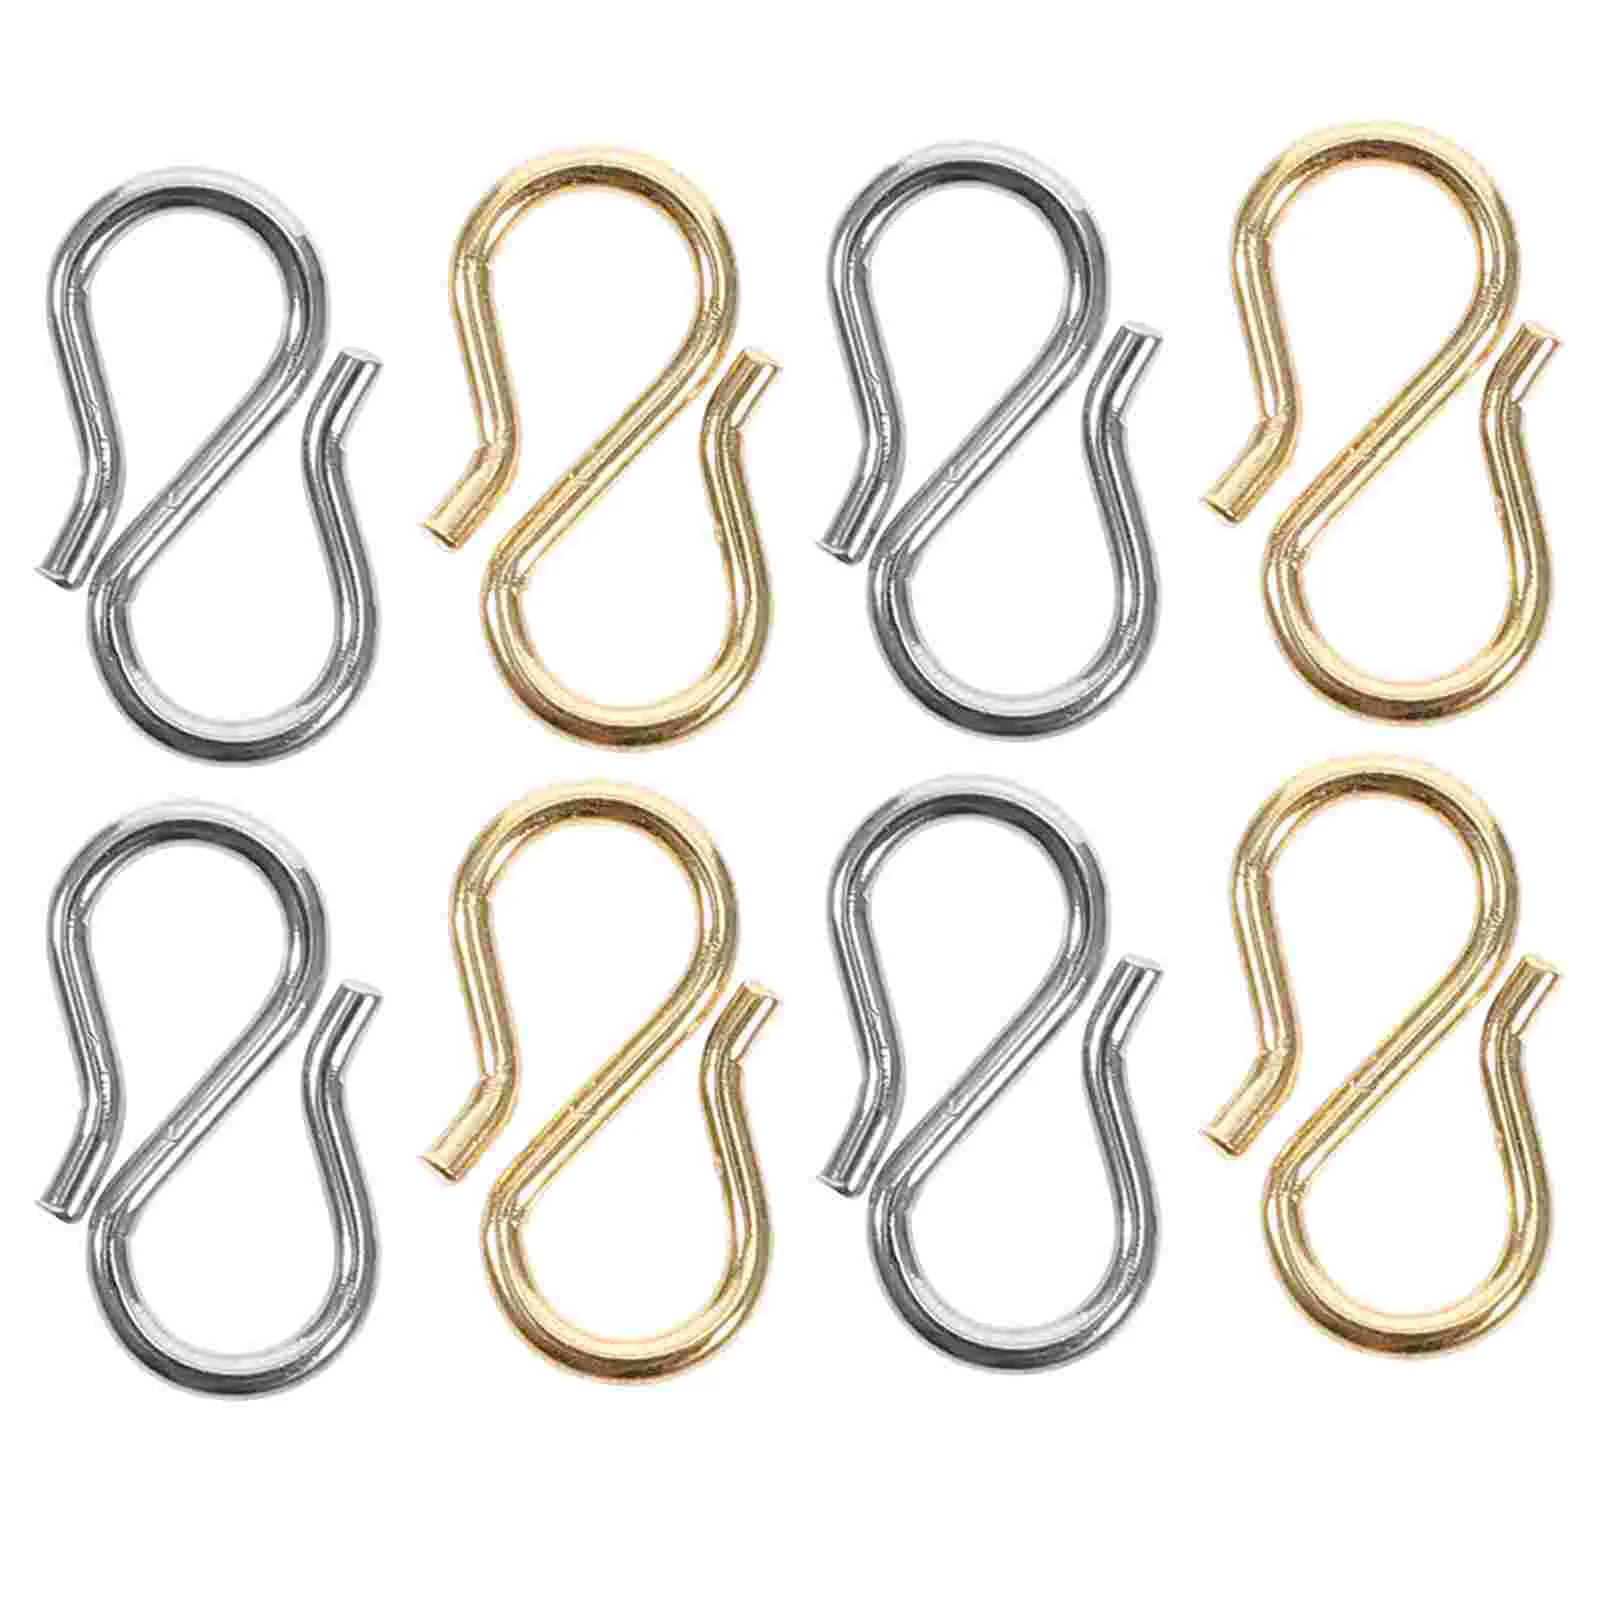 

S Buckle Buckles Bracelet Connecting DIY Jewelry Making Supplies Clasp S-shape Material Clasps Crafts Hand